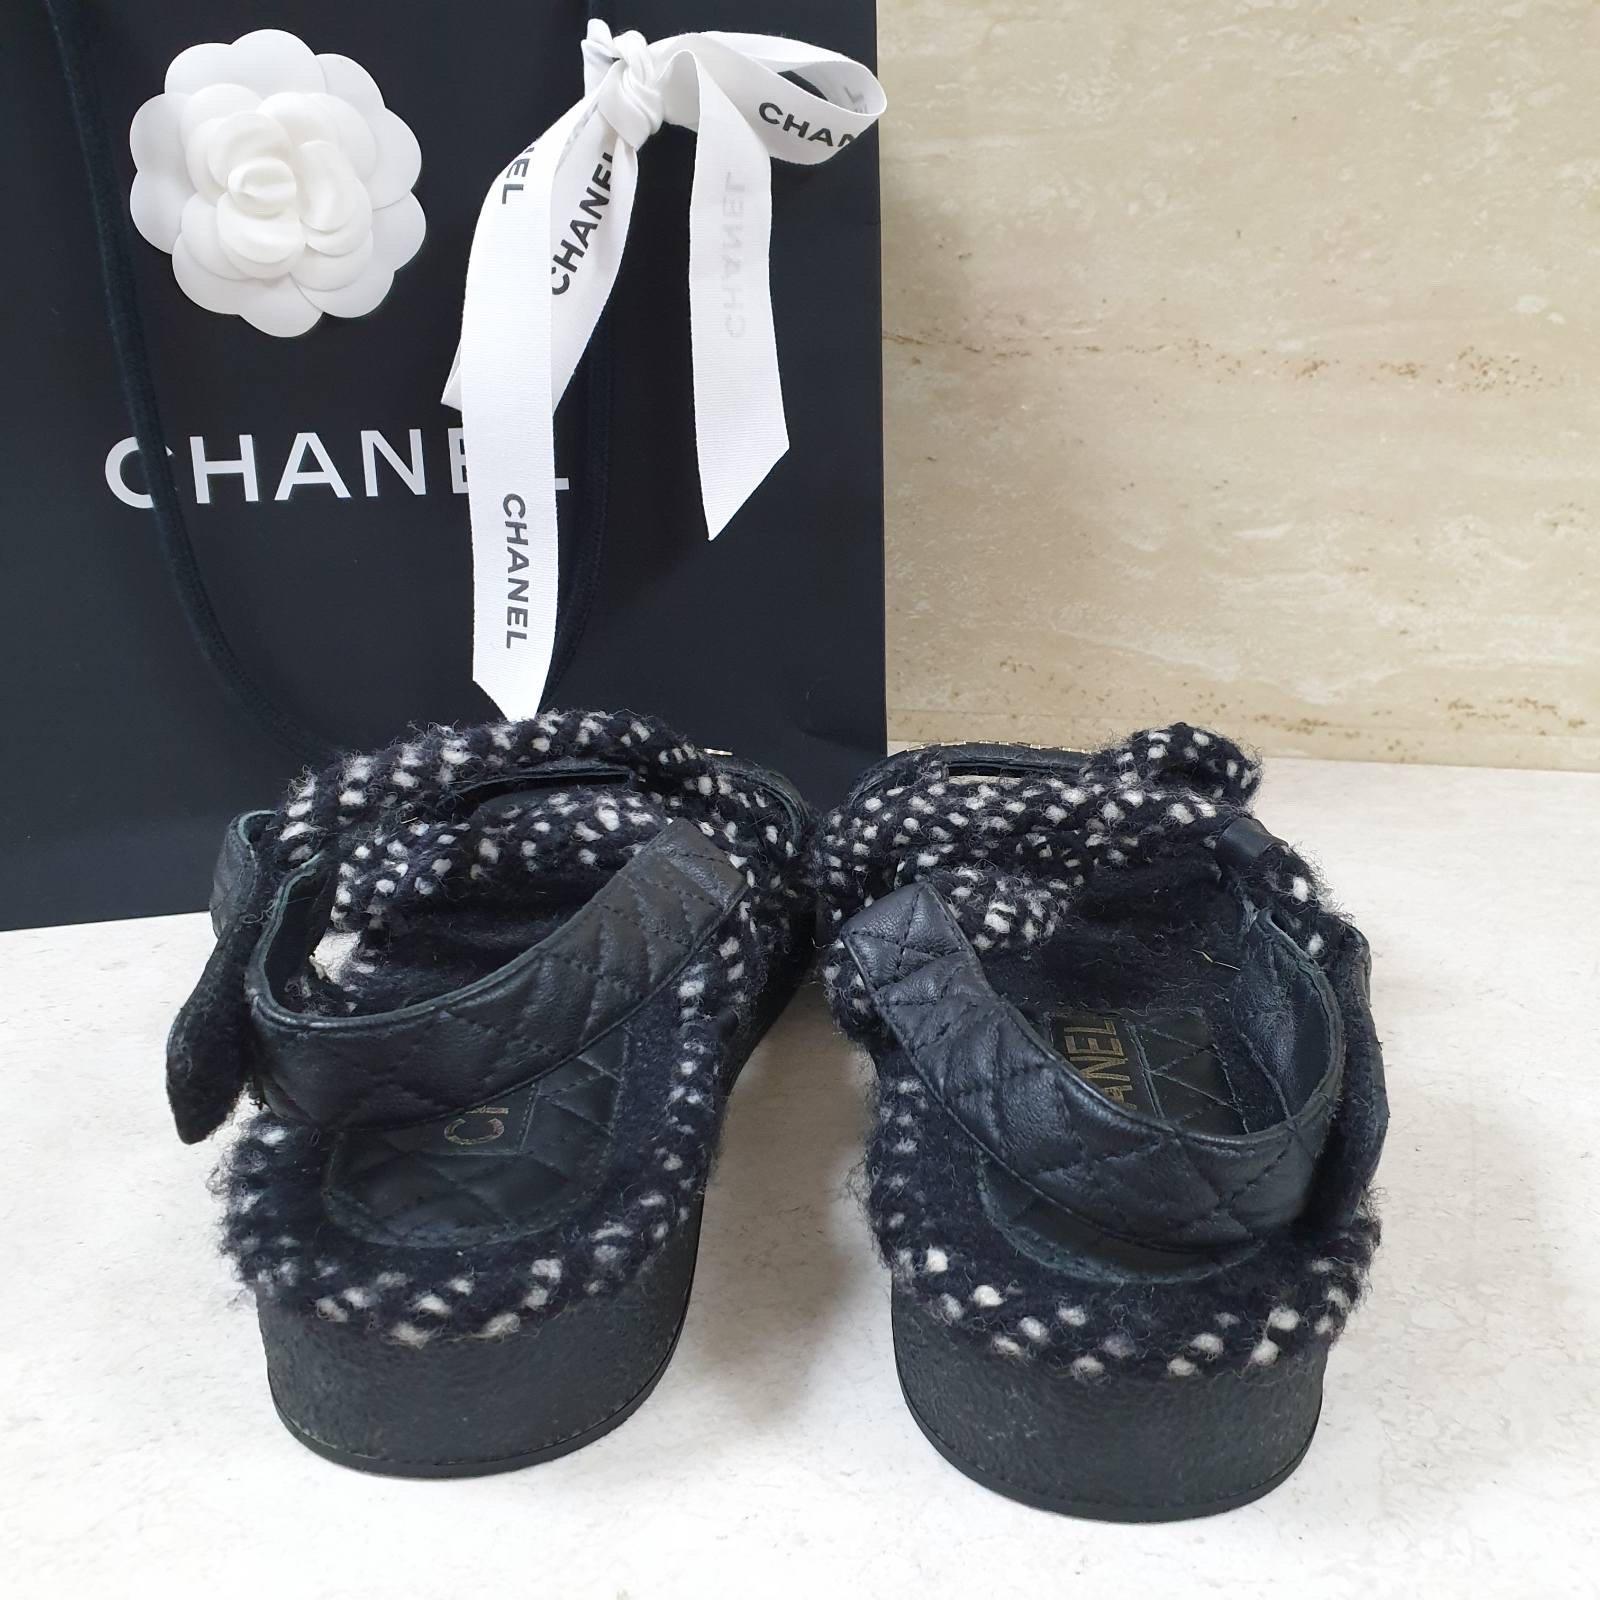 Chanel Sandals Lambskin - 5 For Sale on 1stDibs